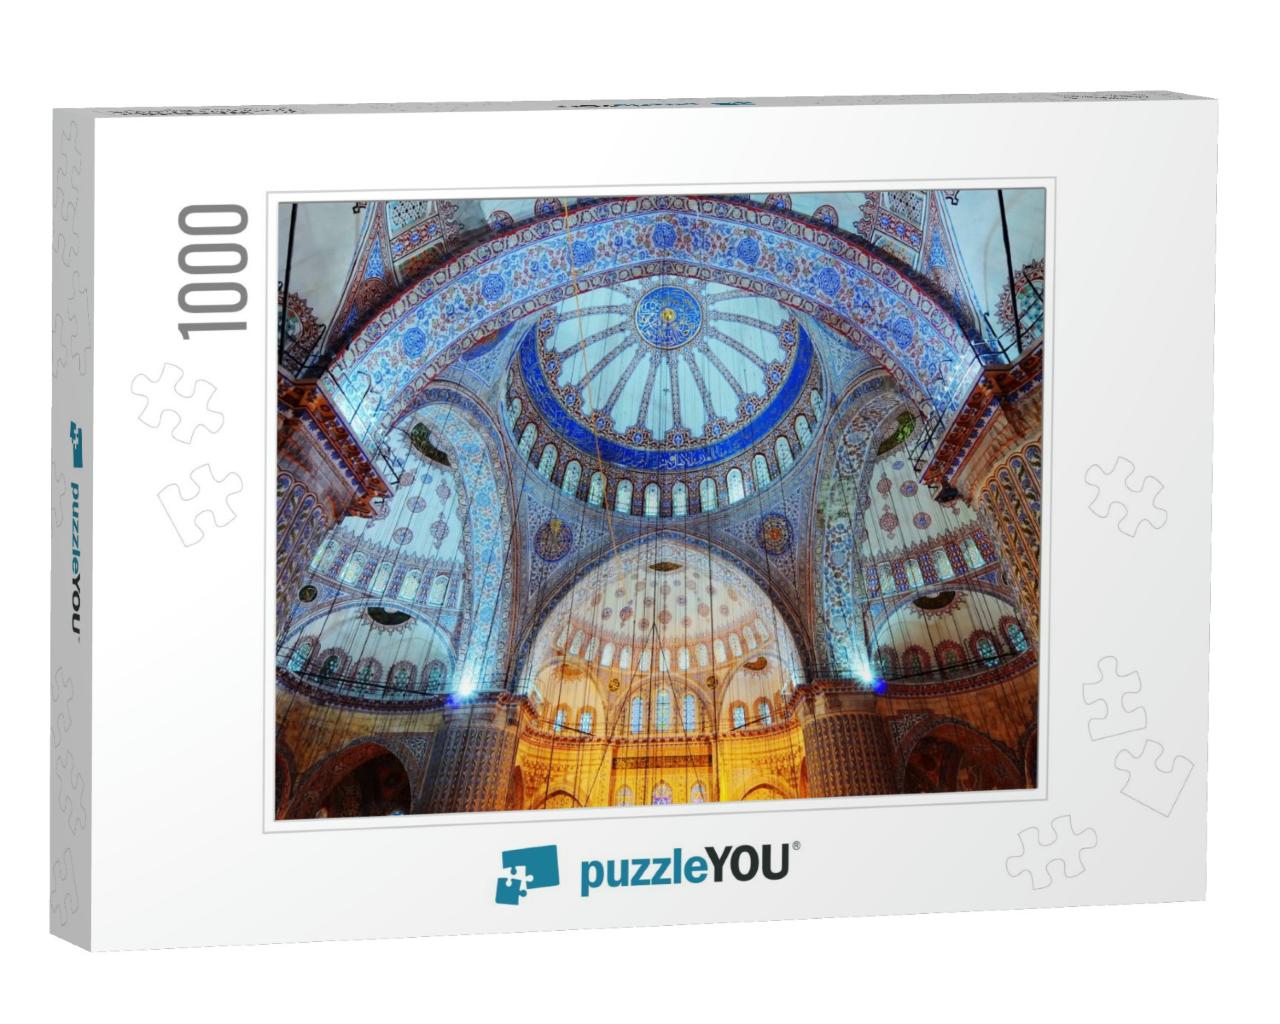 December 18, 2010 Istanbul. Blue Mosque Sultanahmet Camii... Jigsaw Puzzle with 1000 pieces